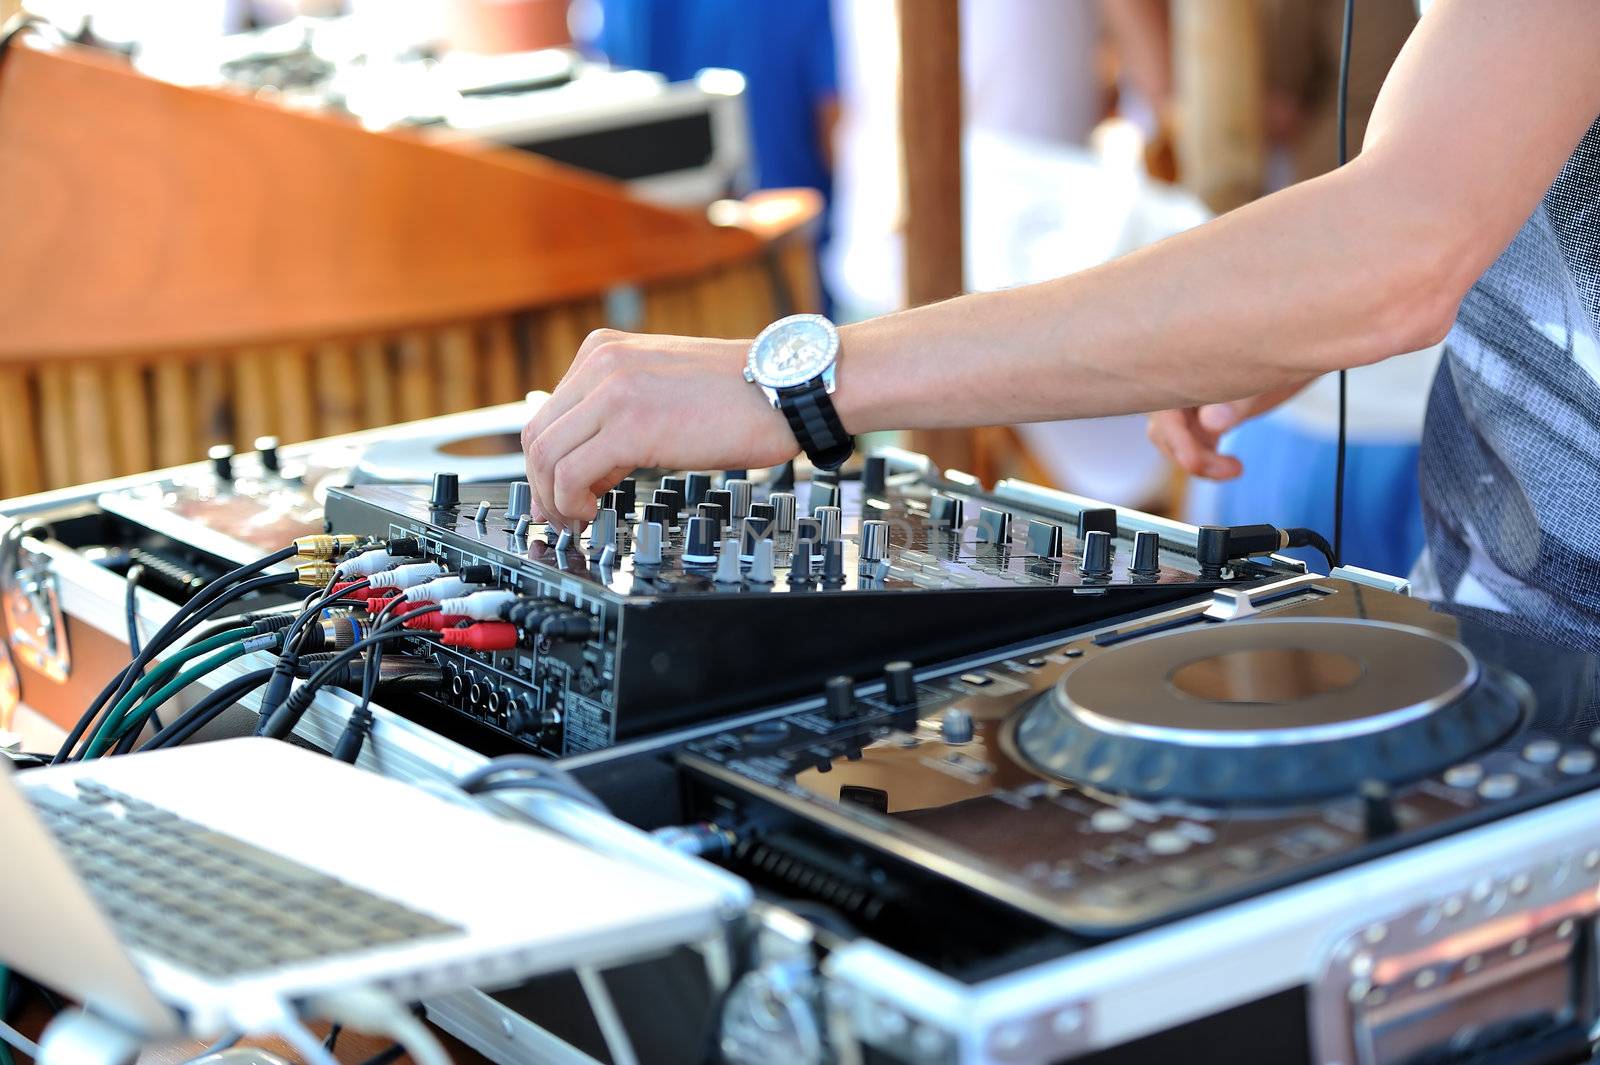 A detail of dj who is mixing the track on the beach party